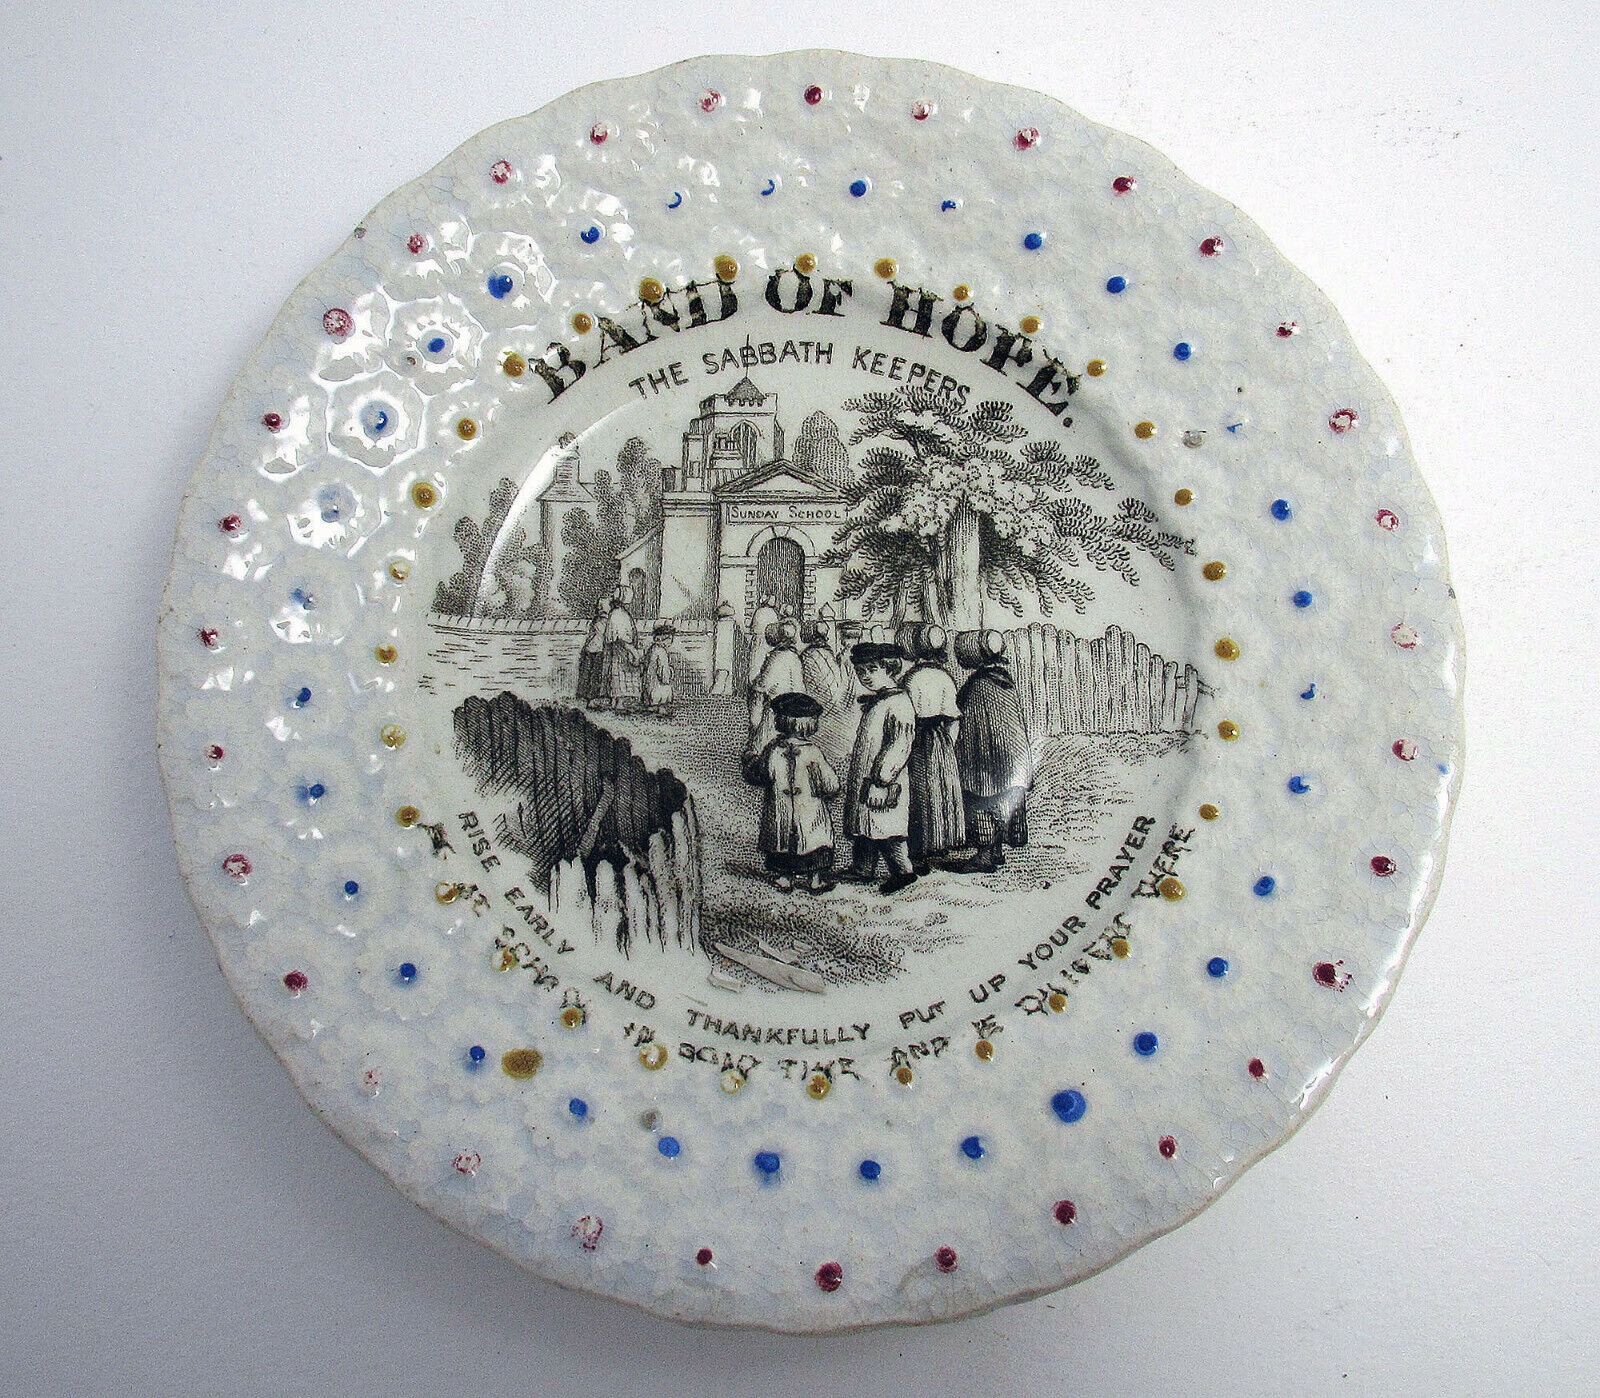 BAND OF HOPE c1850 Temperance Sabbath Ceramic Childs Plate Staffordshire Pottery